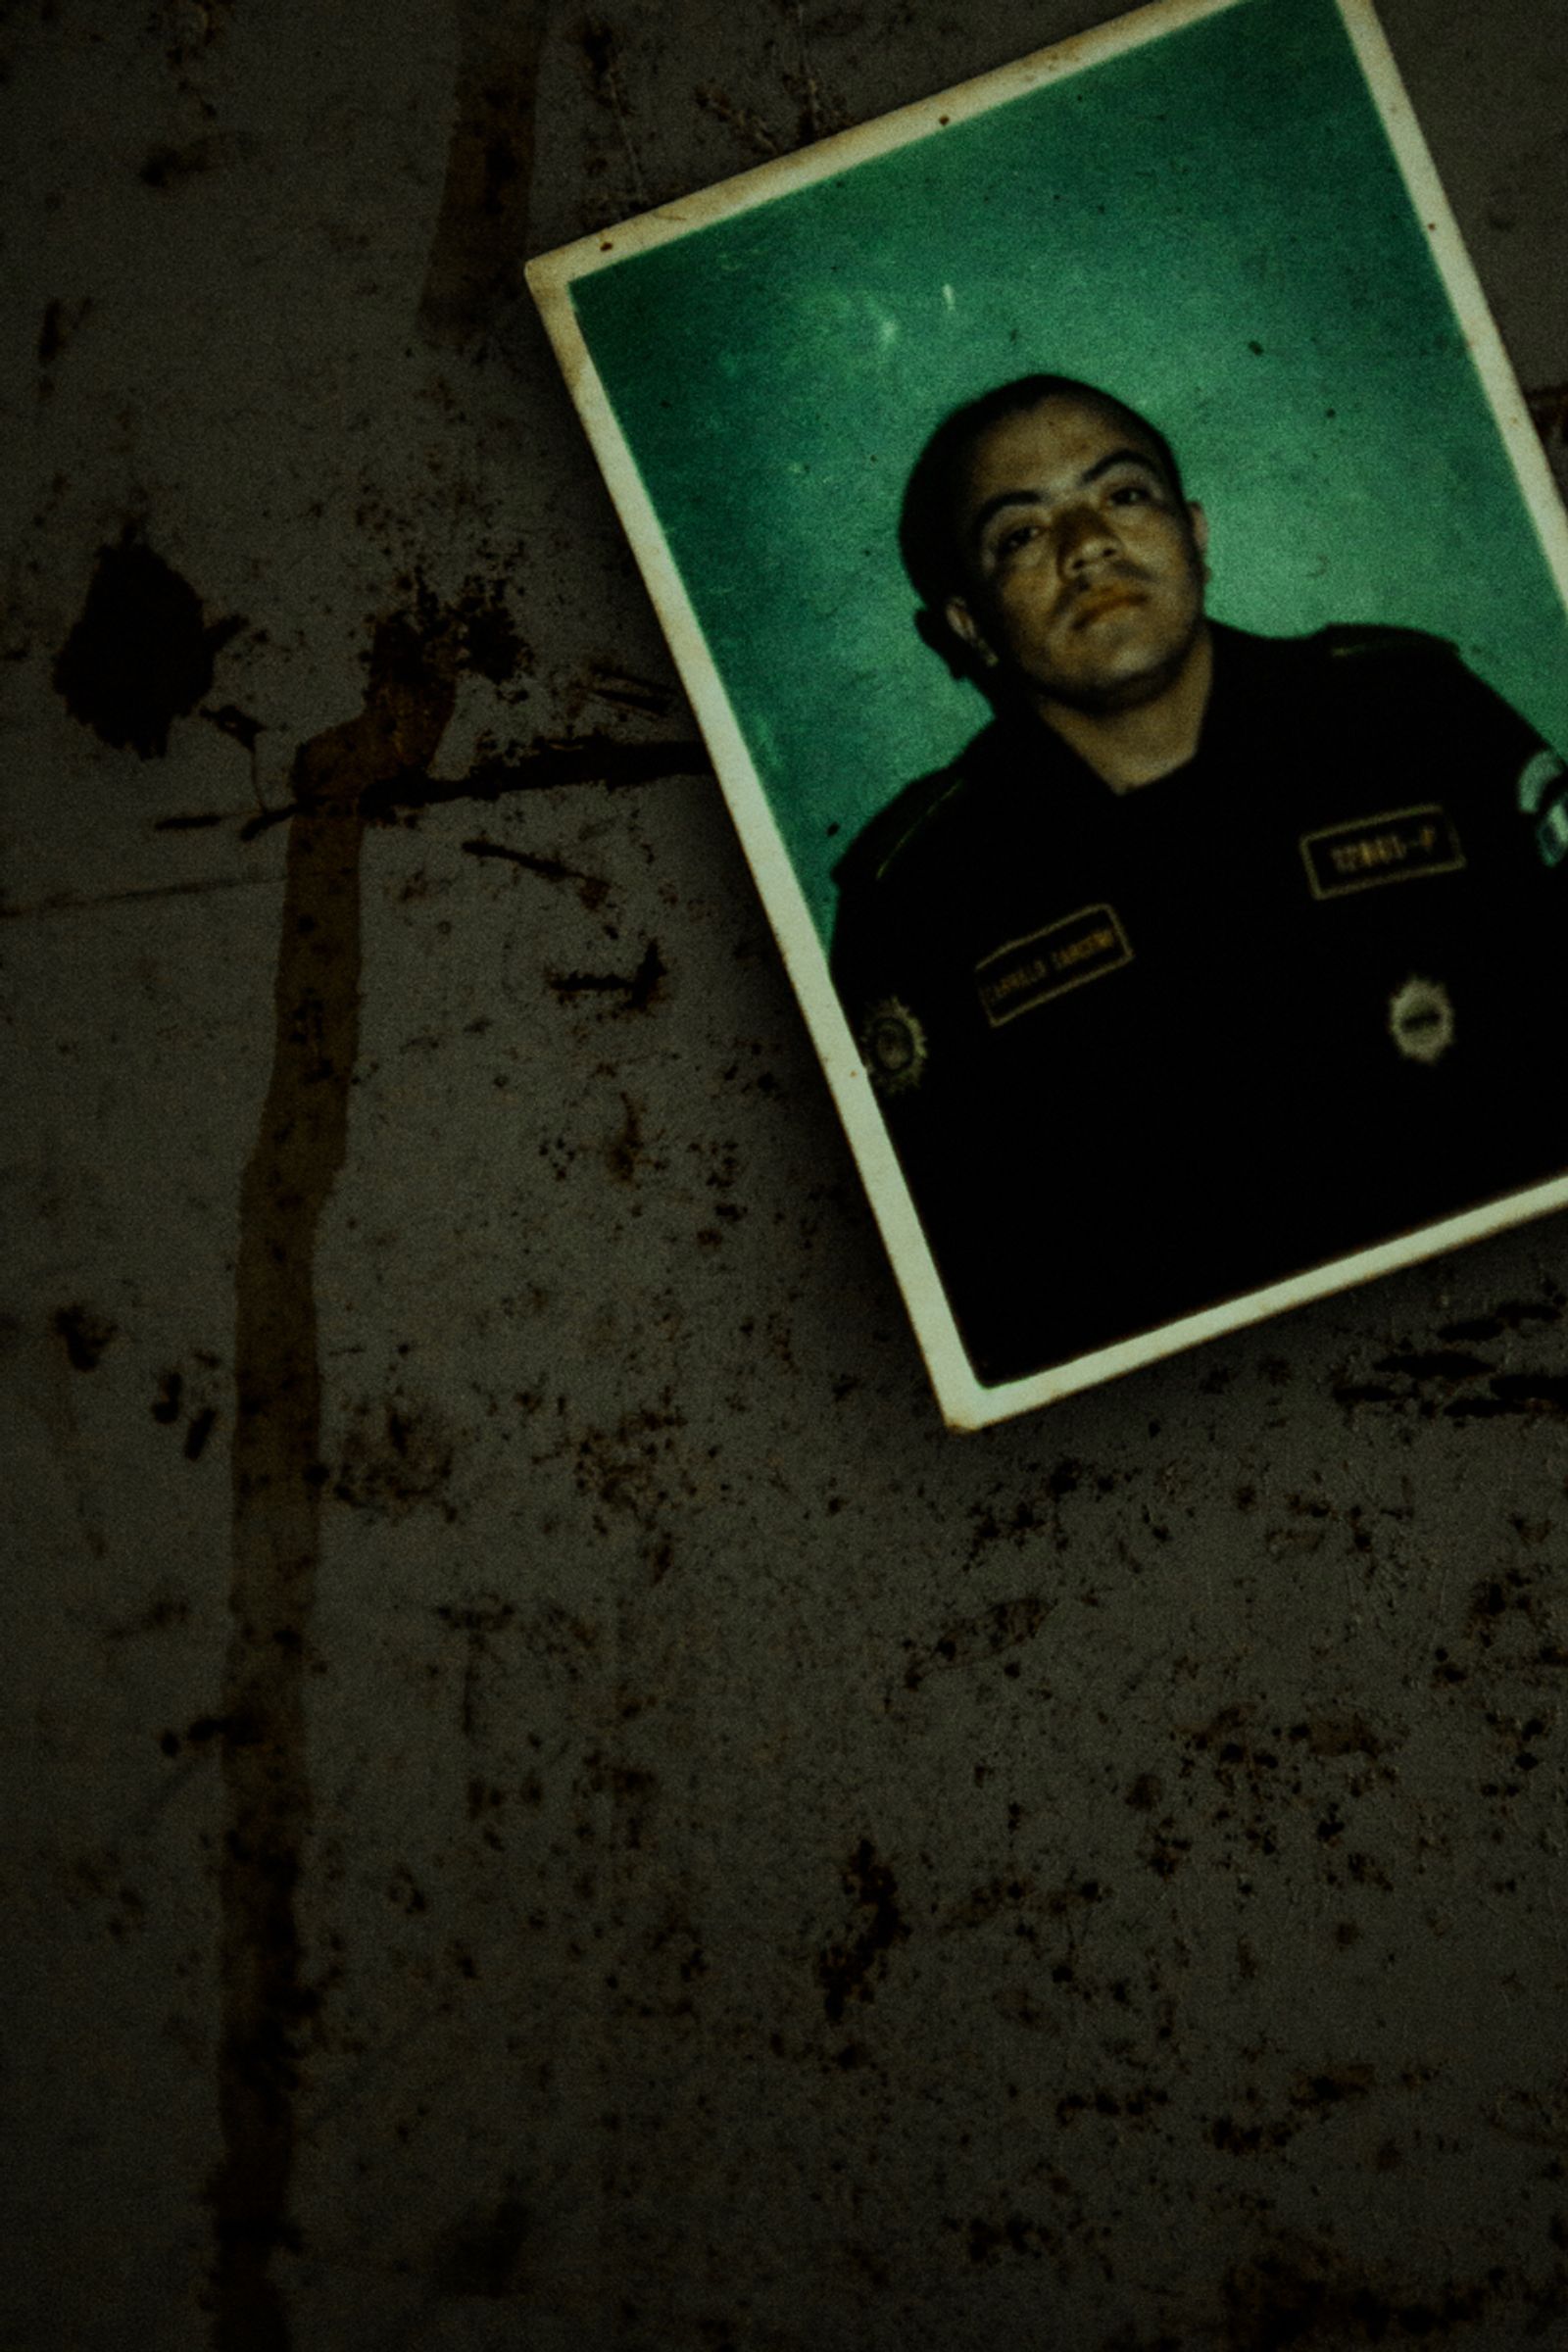 © Celine Croze - Photo of a policeman who was killed. This photo is pinned as a trophy. Patrocinio, Guatemala, 2015